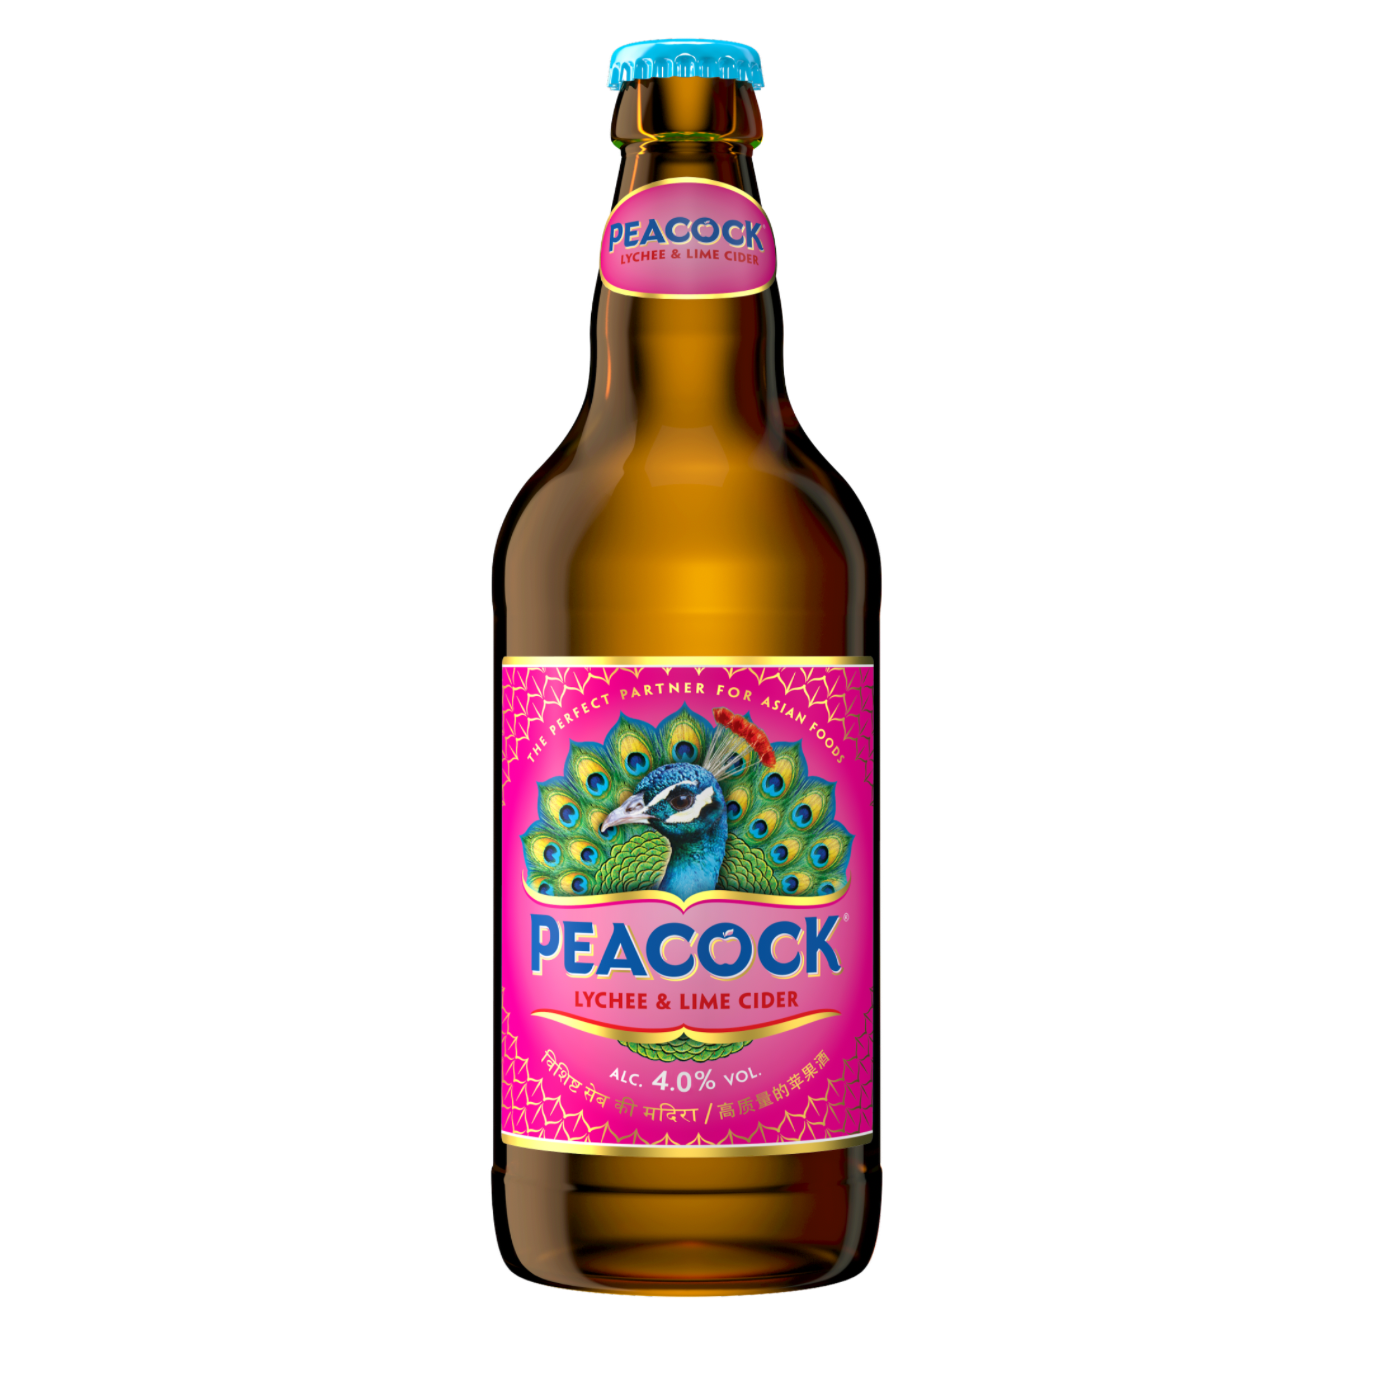 Peacock Lychee & Lime Cider